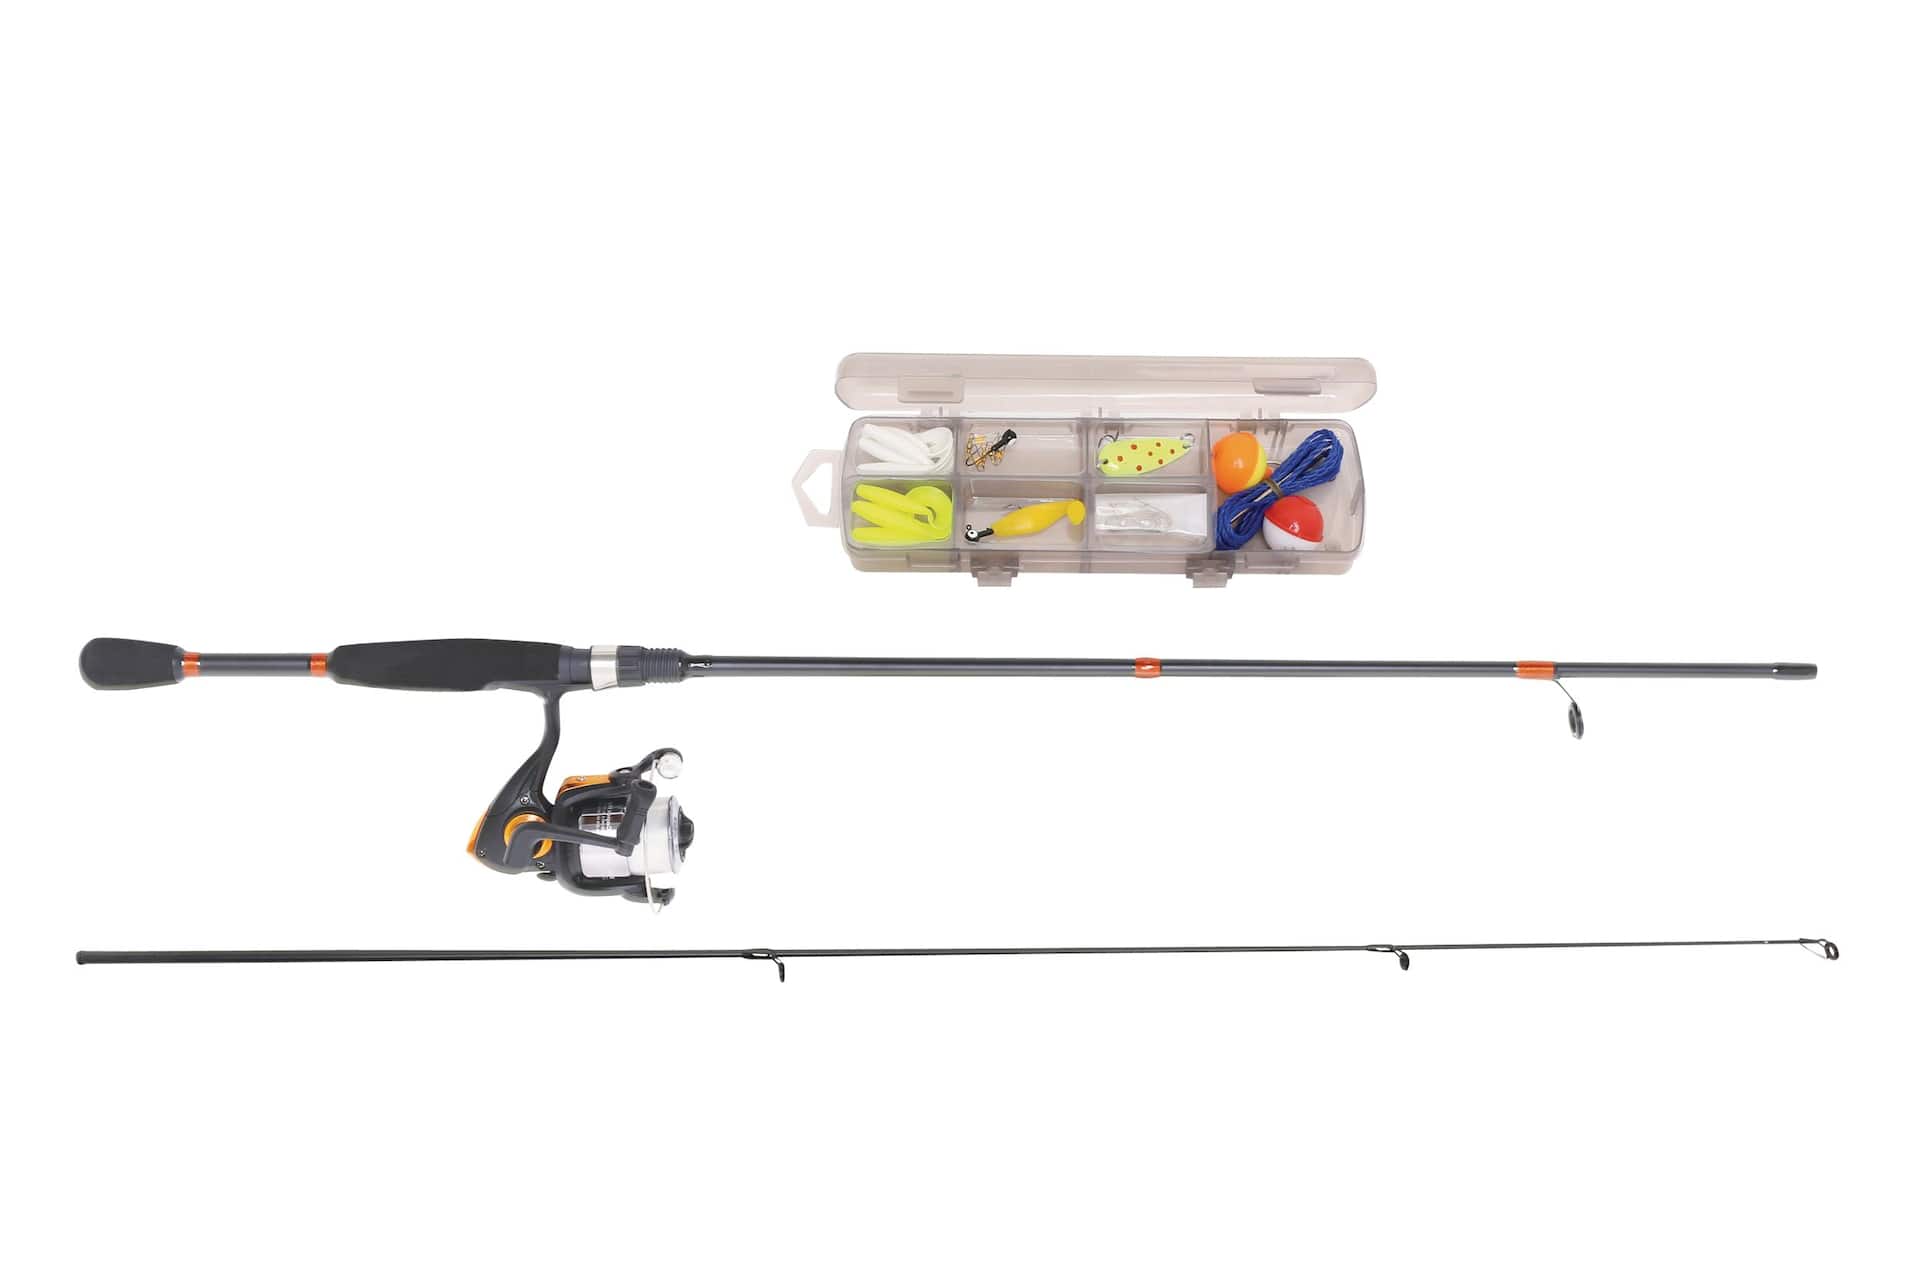 https://media-www.canadiantire.ca/product/playing/fishing/fishing-equipment/0777469/red-wolf-universal-spinning-combo-c0d02317-7f06-4d38-a09b-b76f9c94041d-jpgrendition.jpg